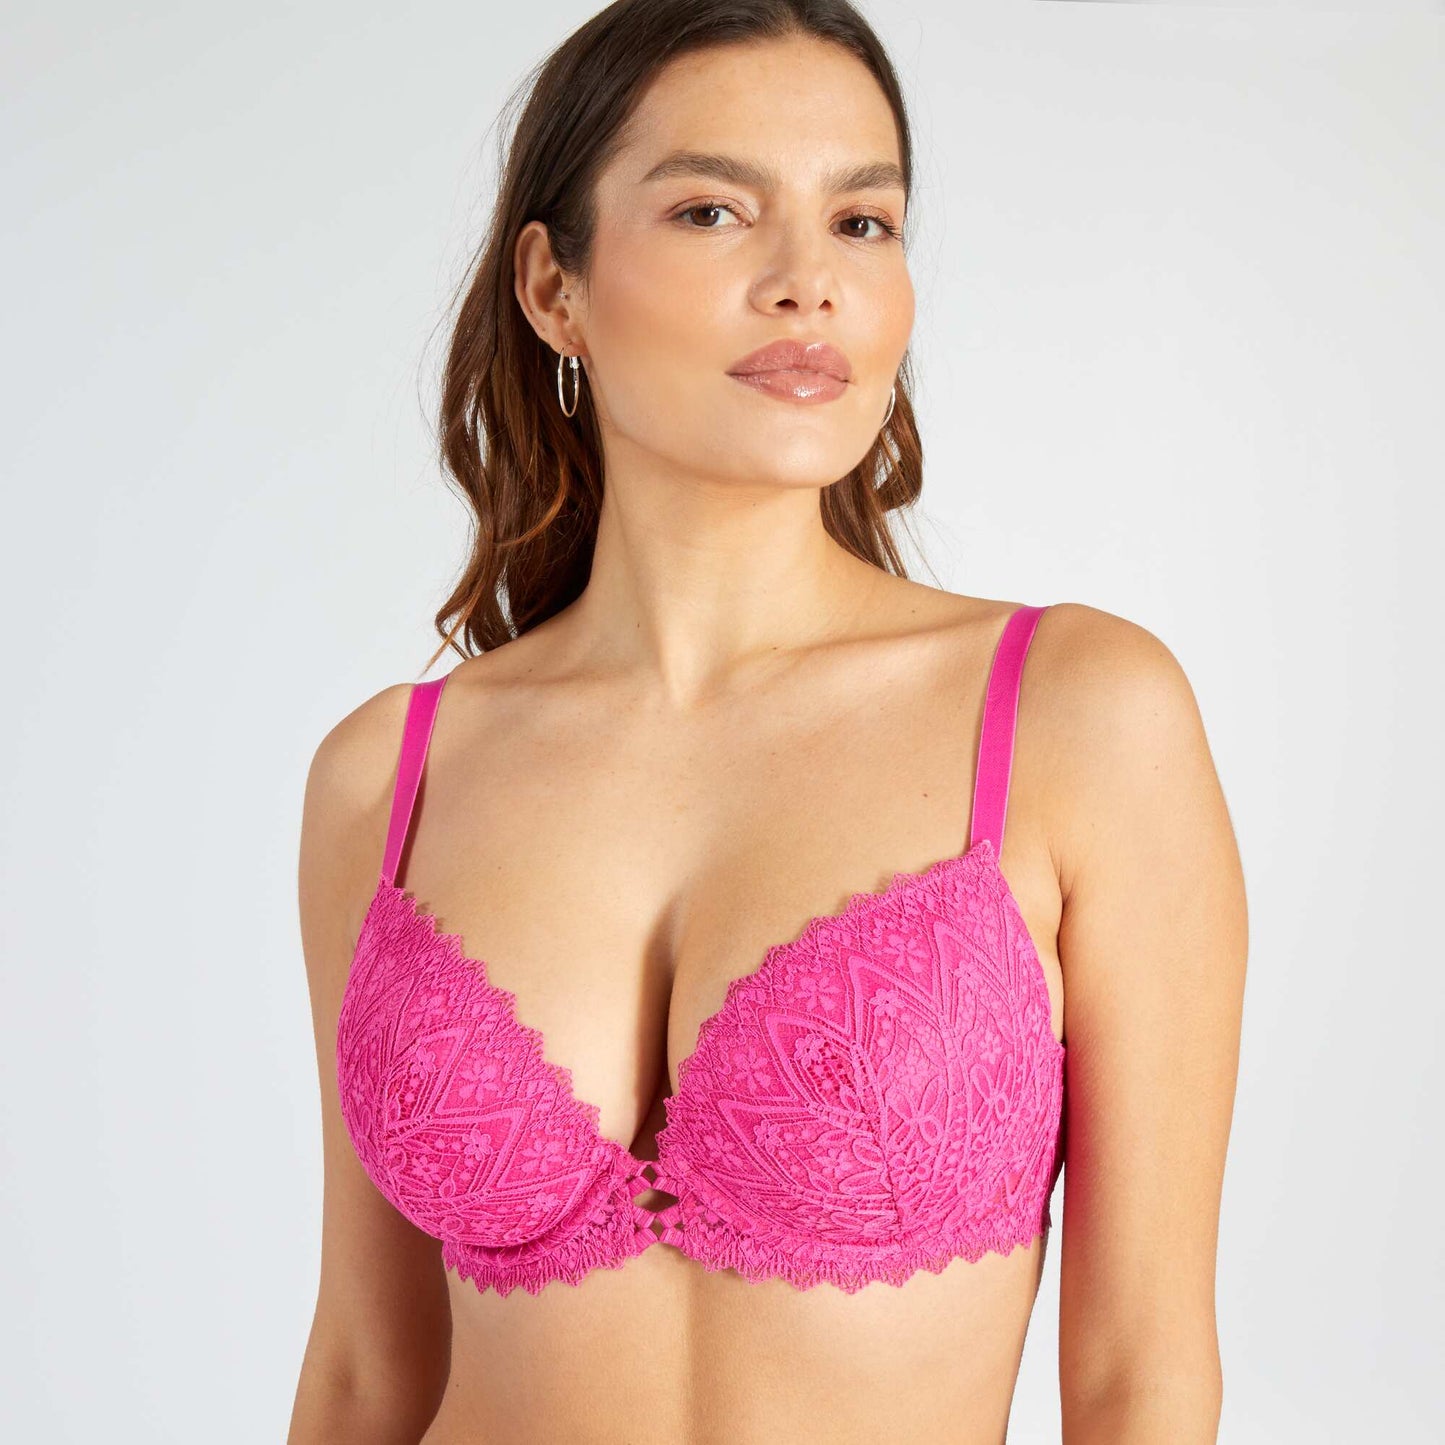 Lace bra for D & E cups PINK BERRY